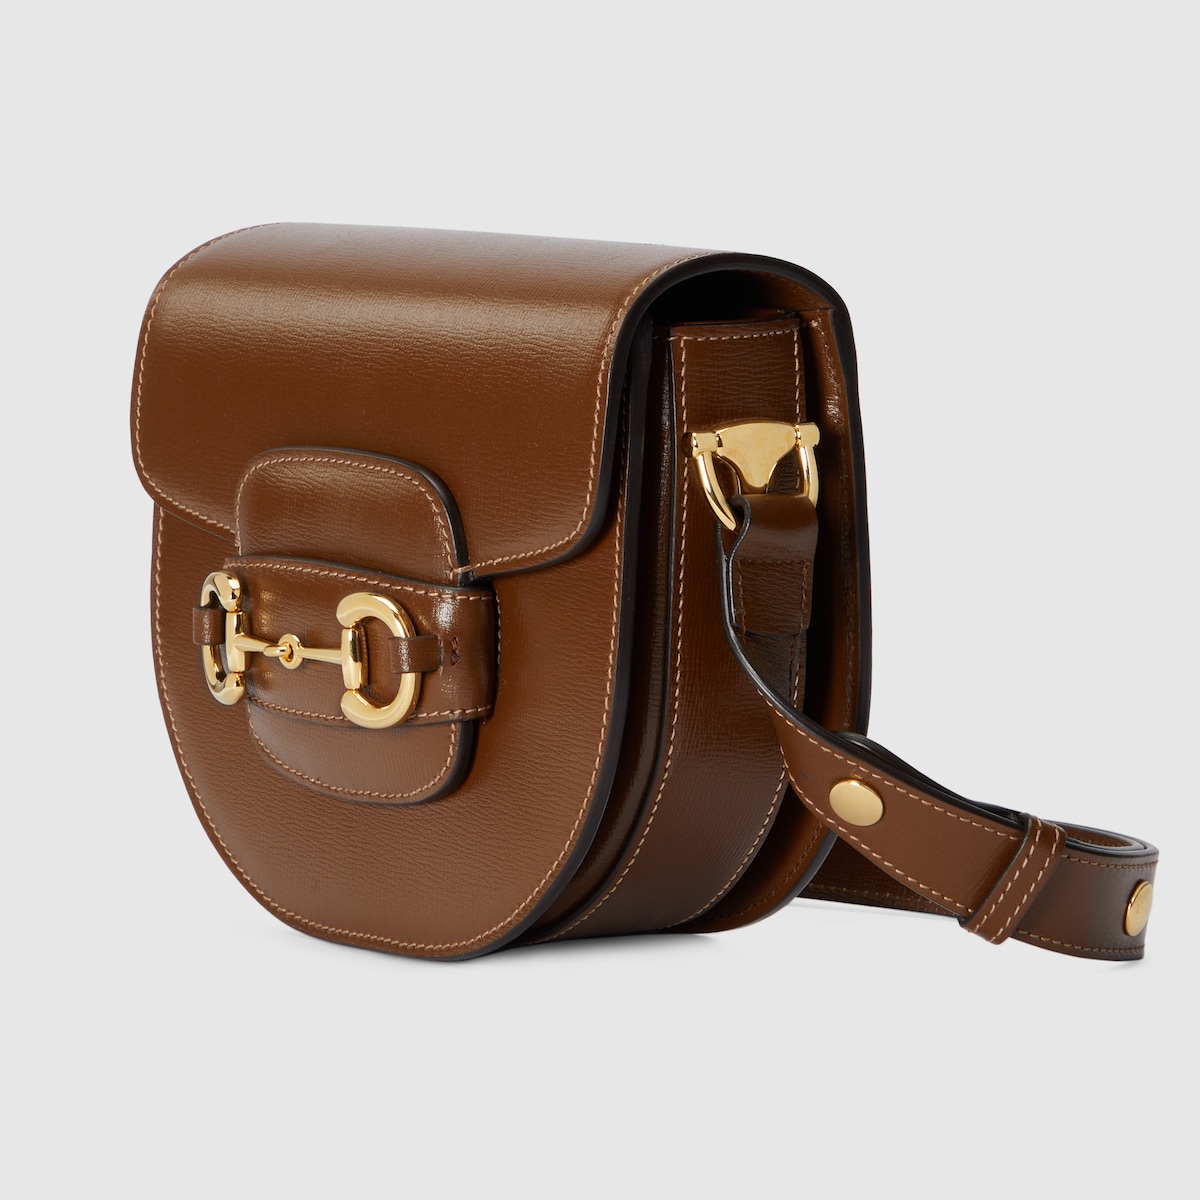 GUCCI HORSEBIT 1955 MINI ROUNDED BAG Brown leather